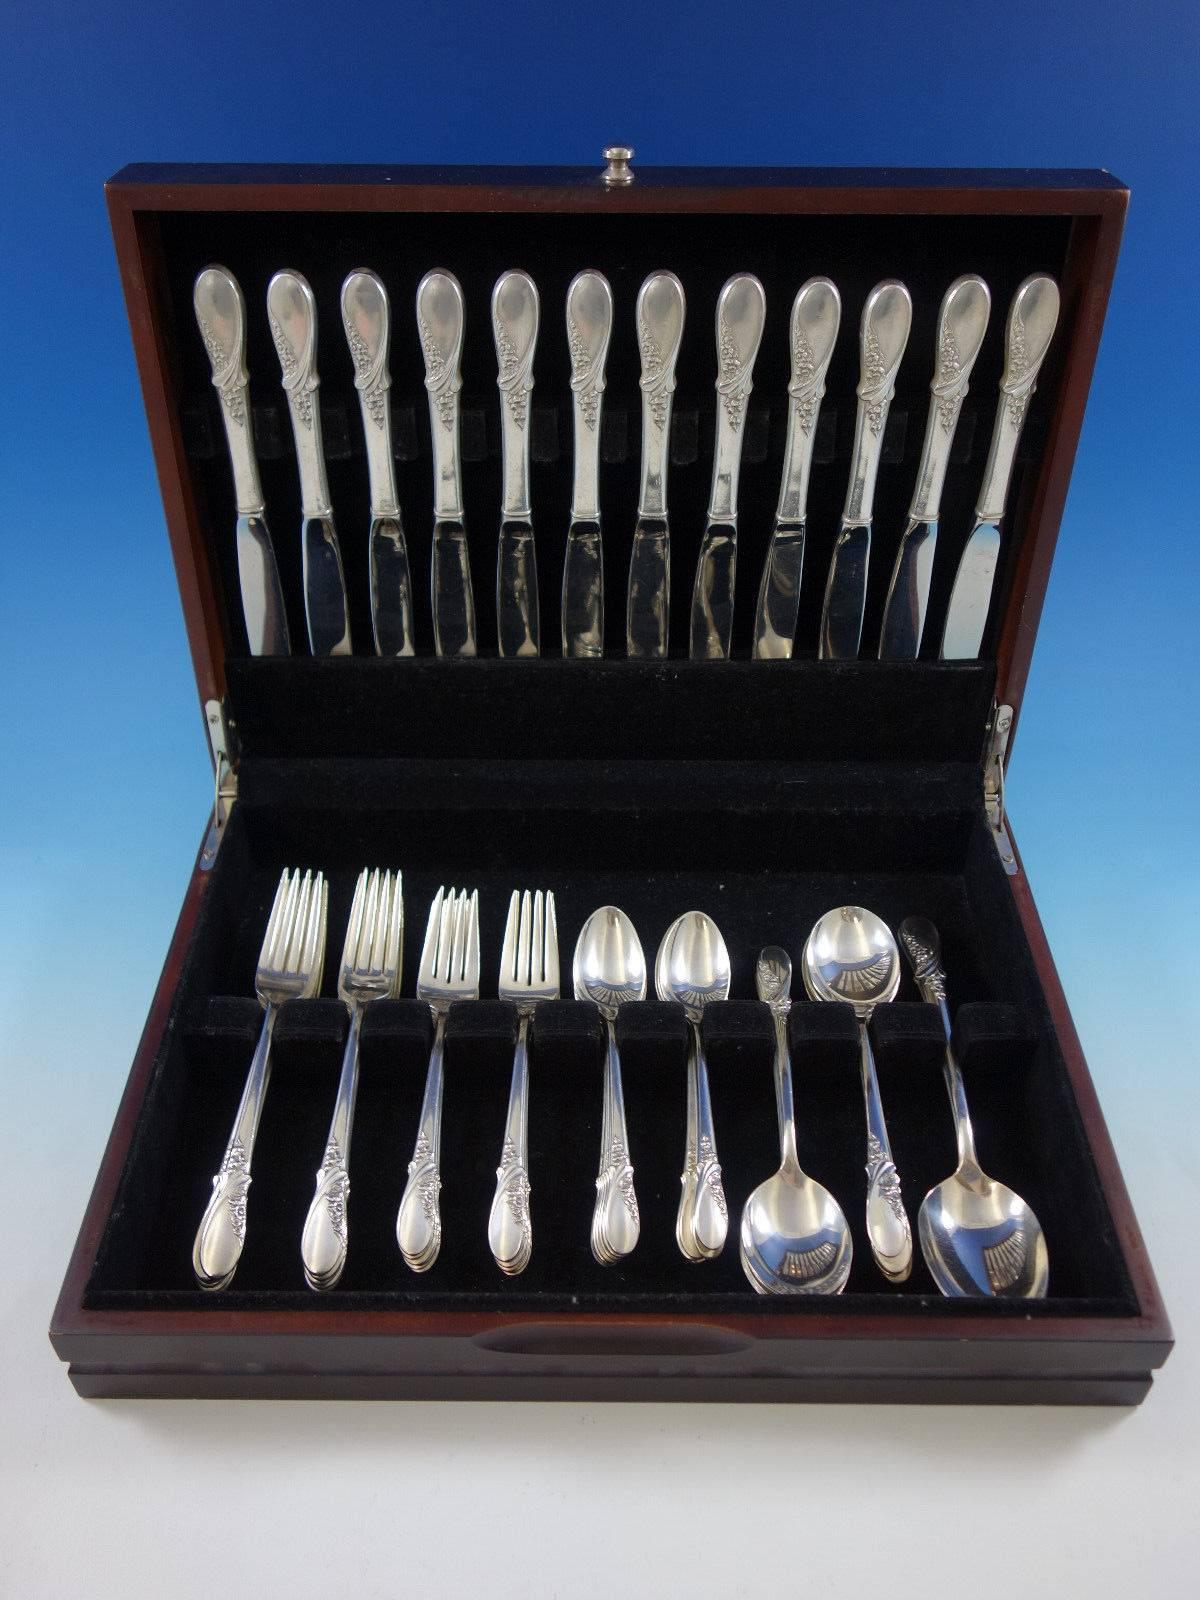 May Melody by International sterling silver flatware set, 62 pieces. This set includes: 

12 knives, 9 1/4